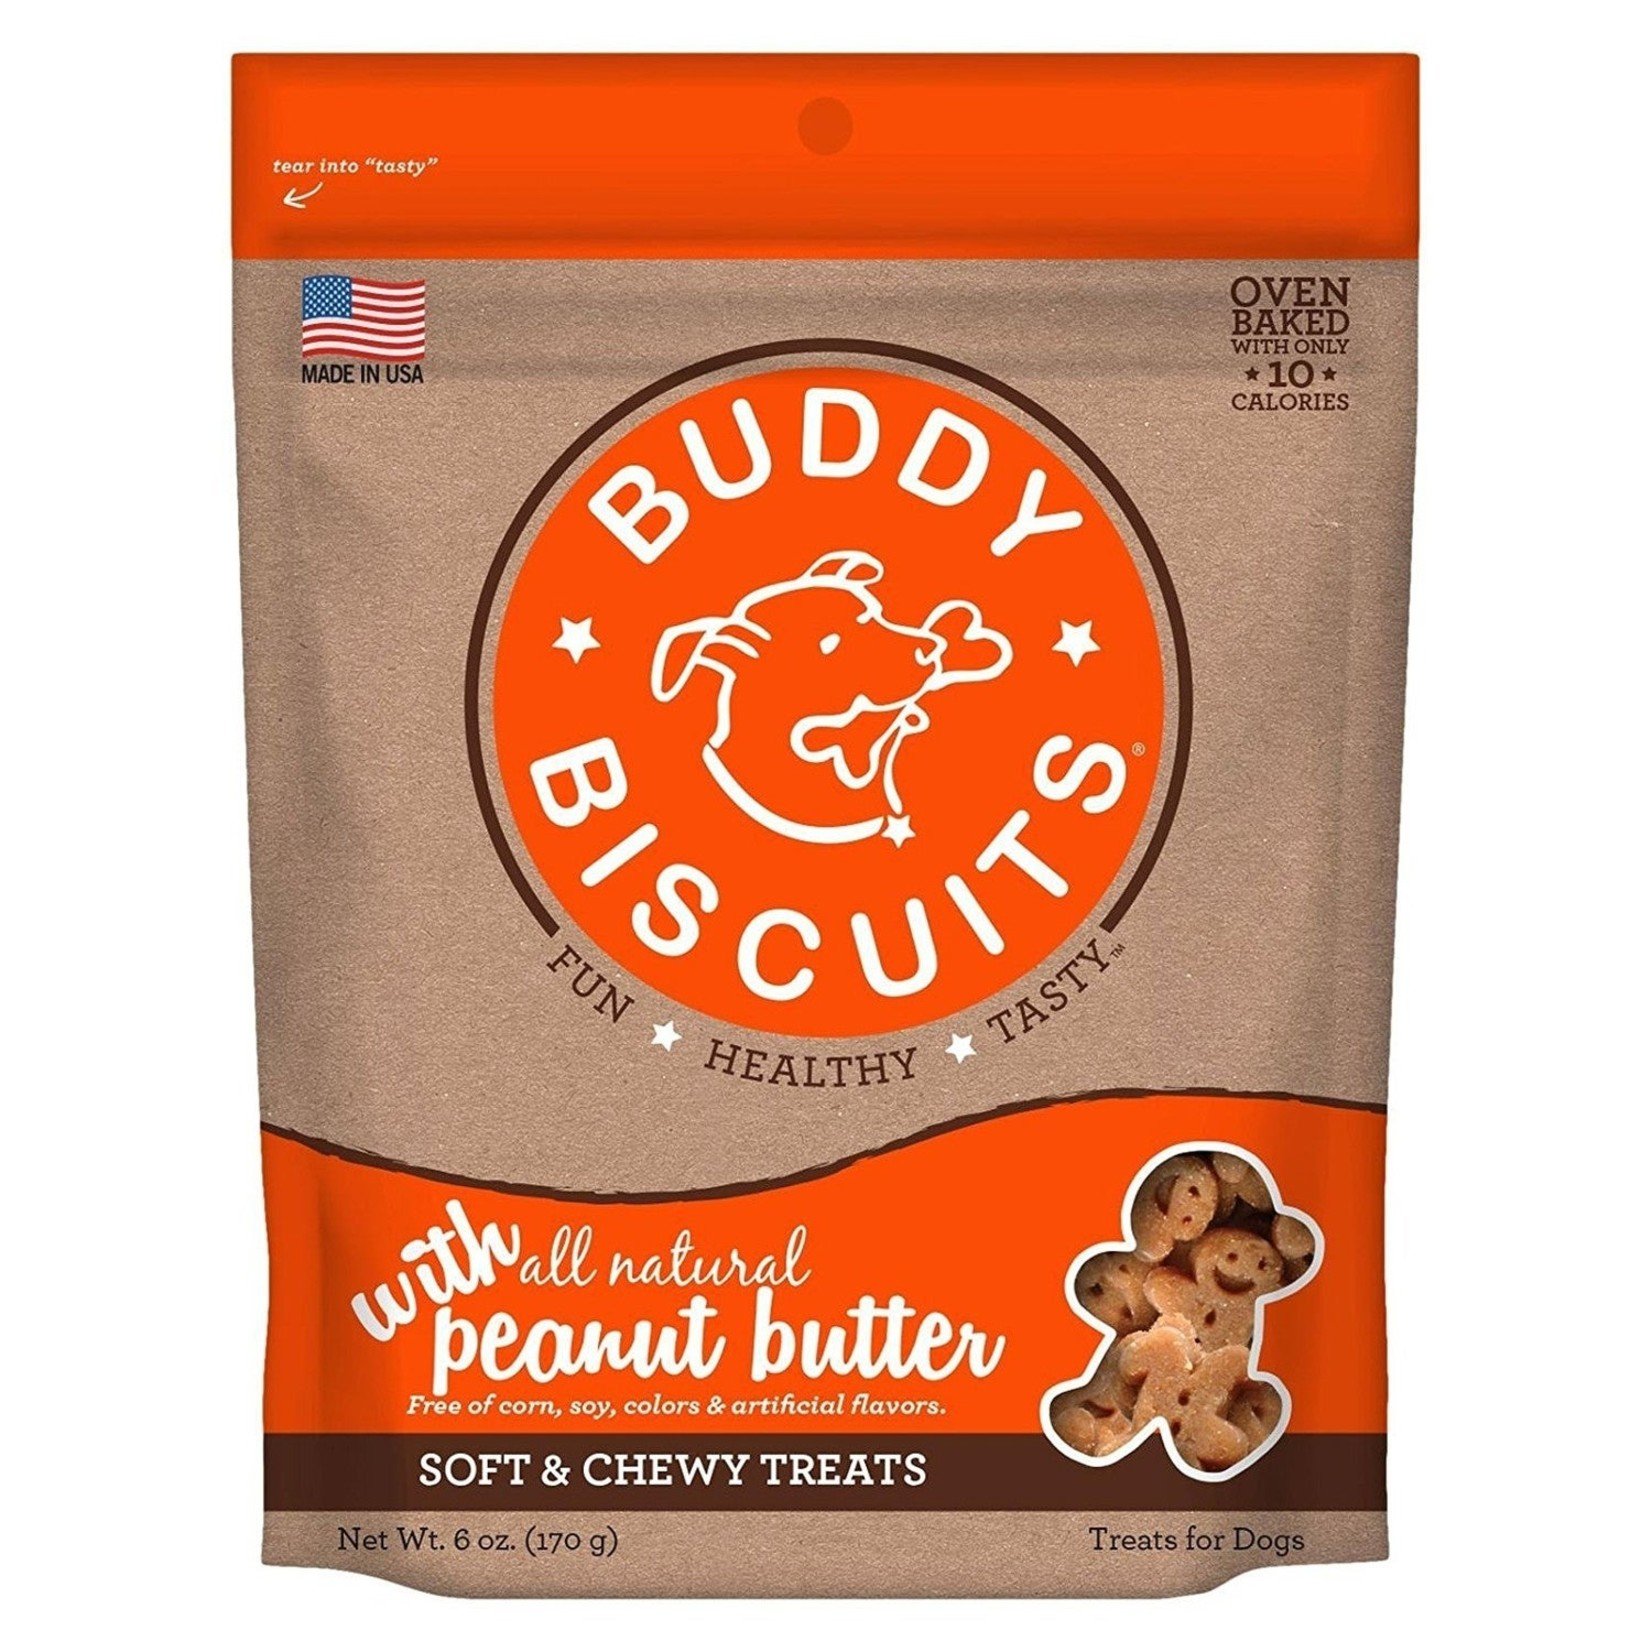 Cloud Star Buddy Biscuits Soft & Chewy Peanut Butter Dog Treats 6oz